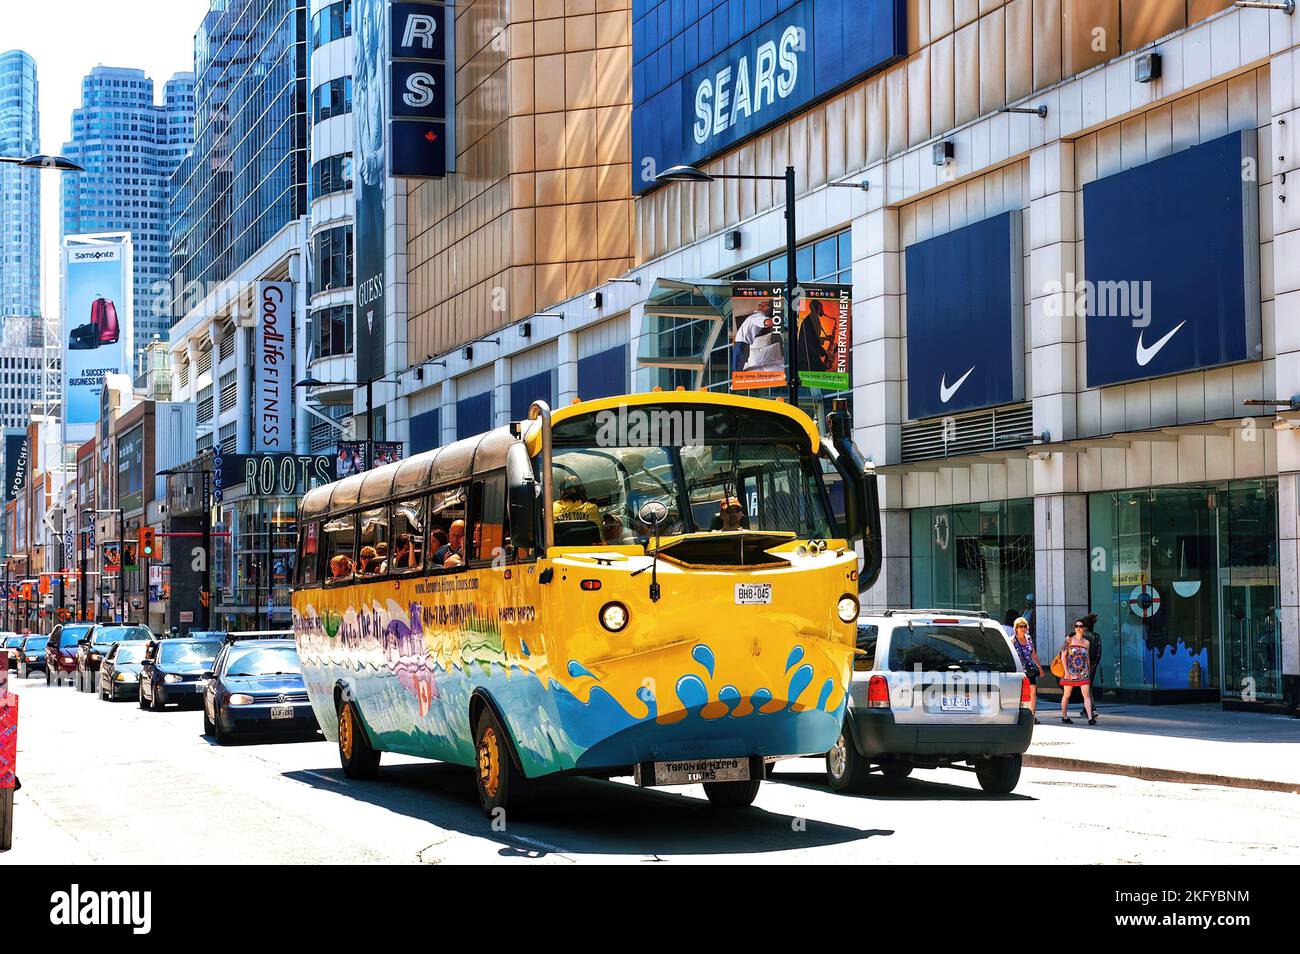 Toronto, Canada - June 6, 2011: The Hippo Tour bus, seen here on Yonge Street, was an amphibious bus that travelled on land on water for 12 years befo Stock Photo